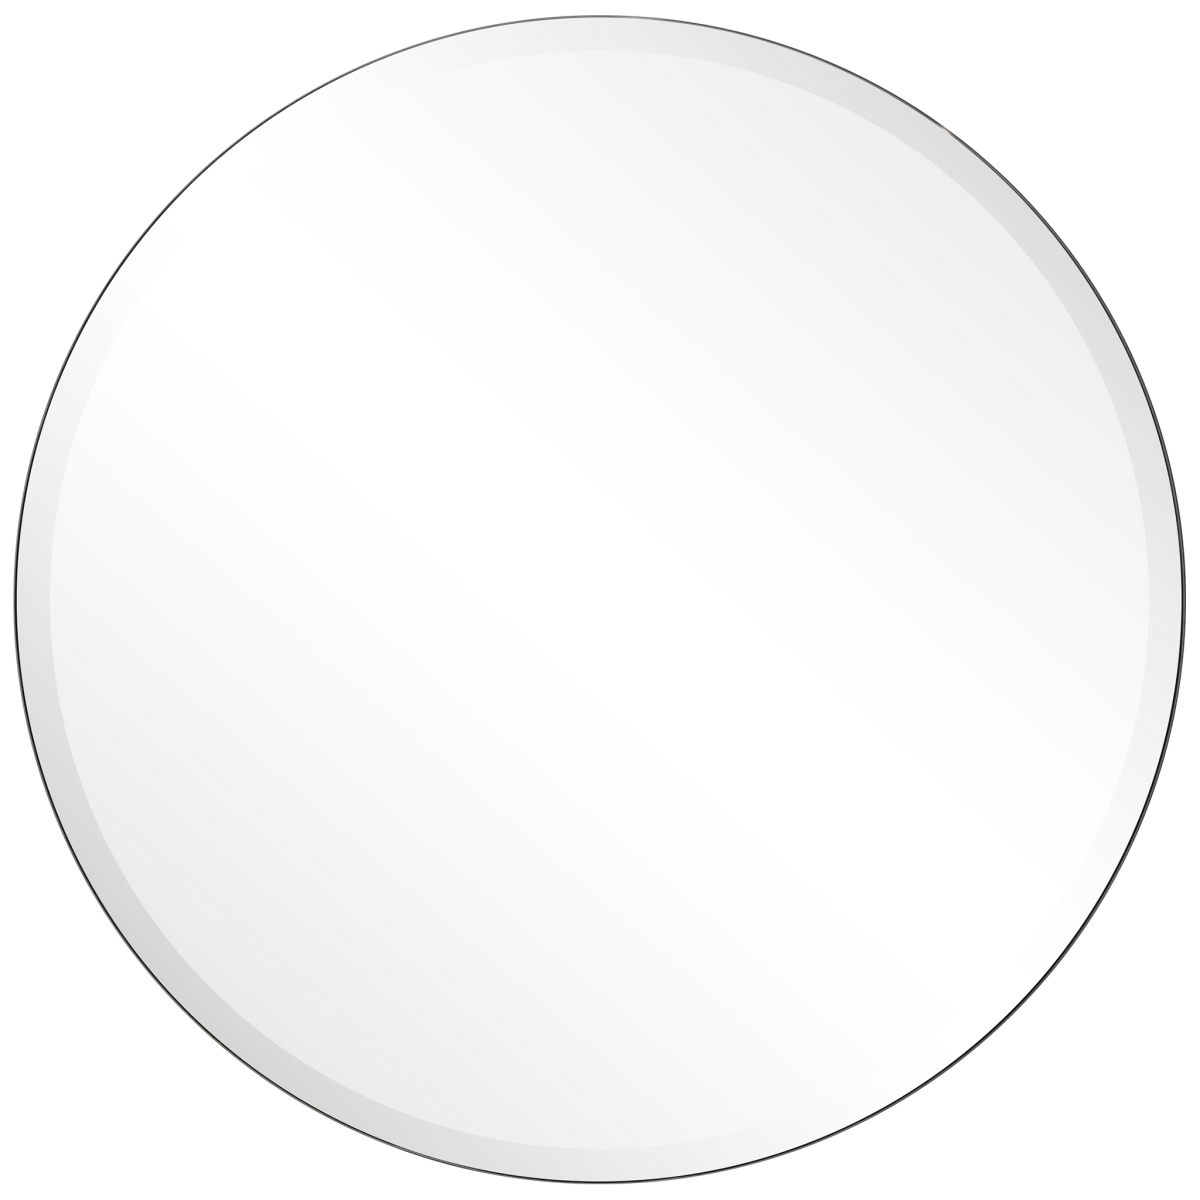 UPC 745704809398 product image for 30 x 30 in. Frameless Beveled Round Wall Mirror - 1 in. Beveled Edge | upcitemdb.com